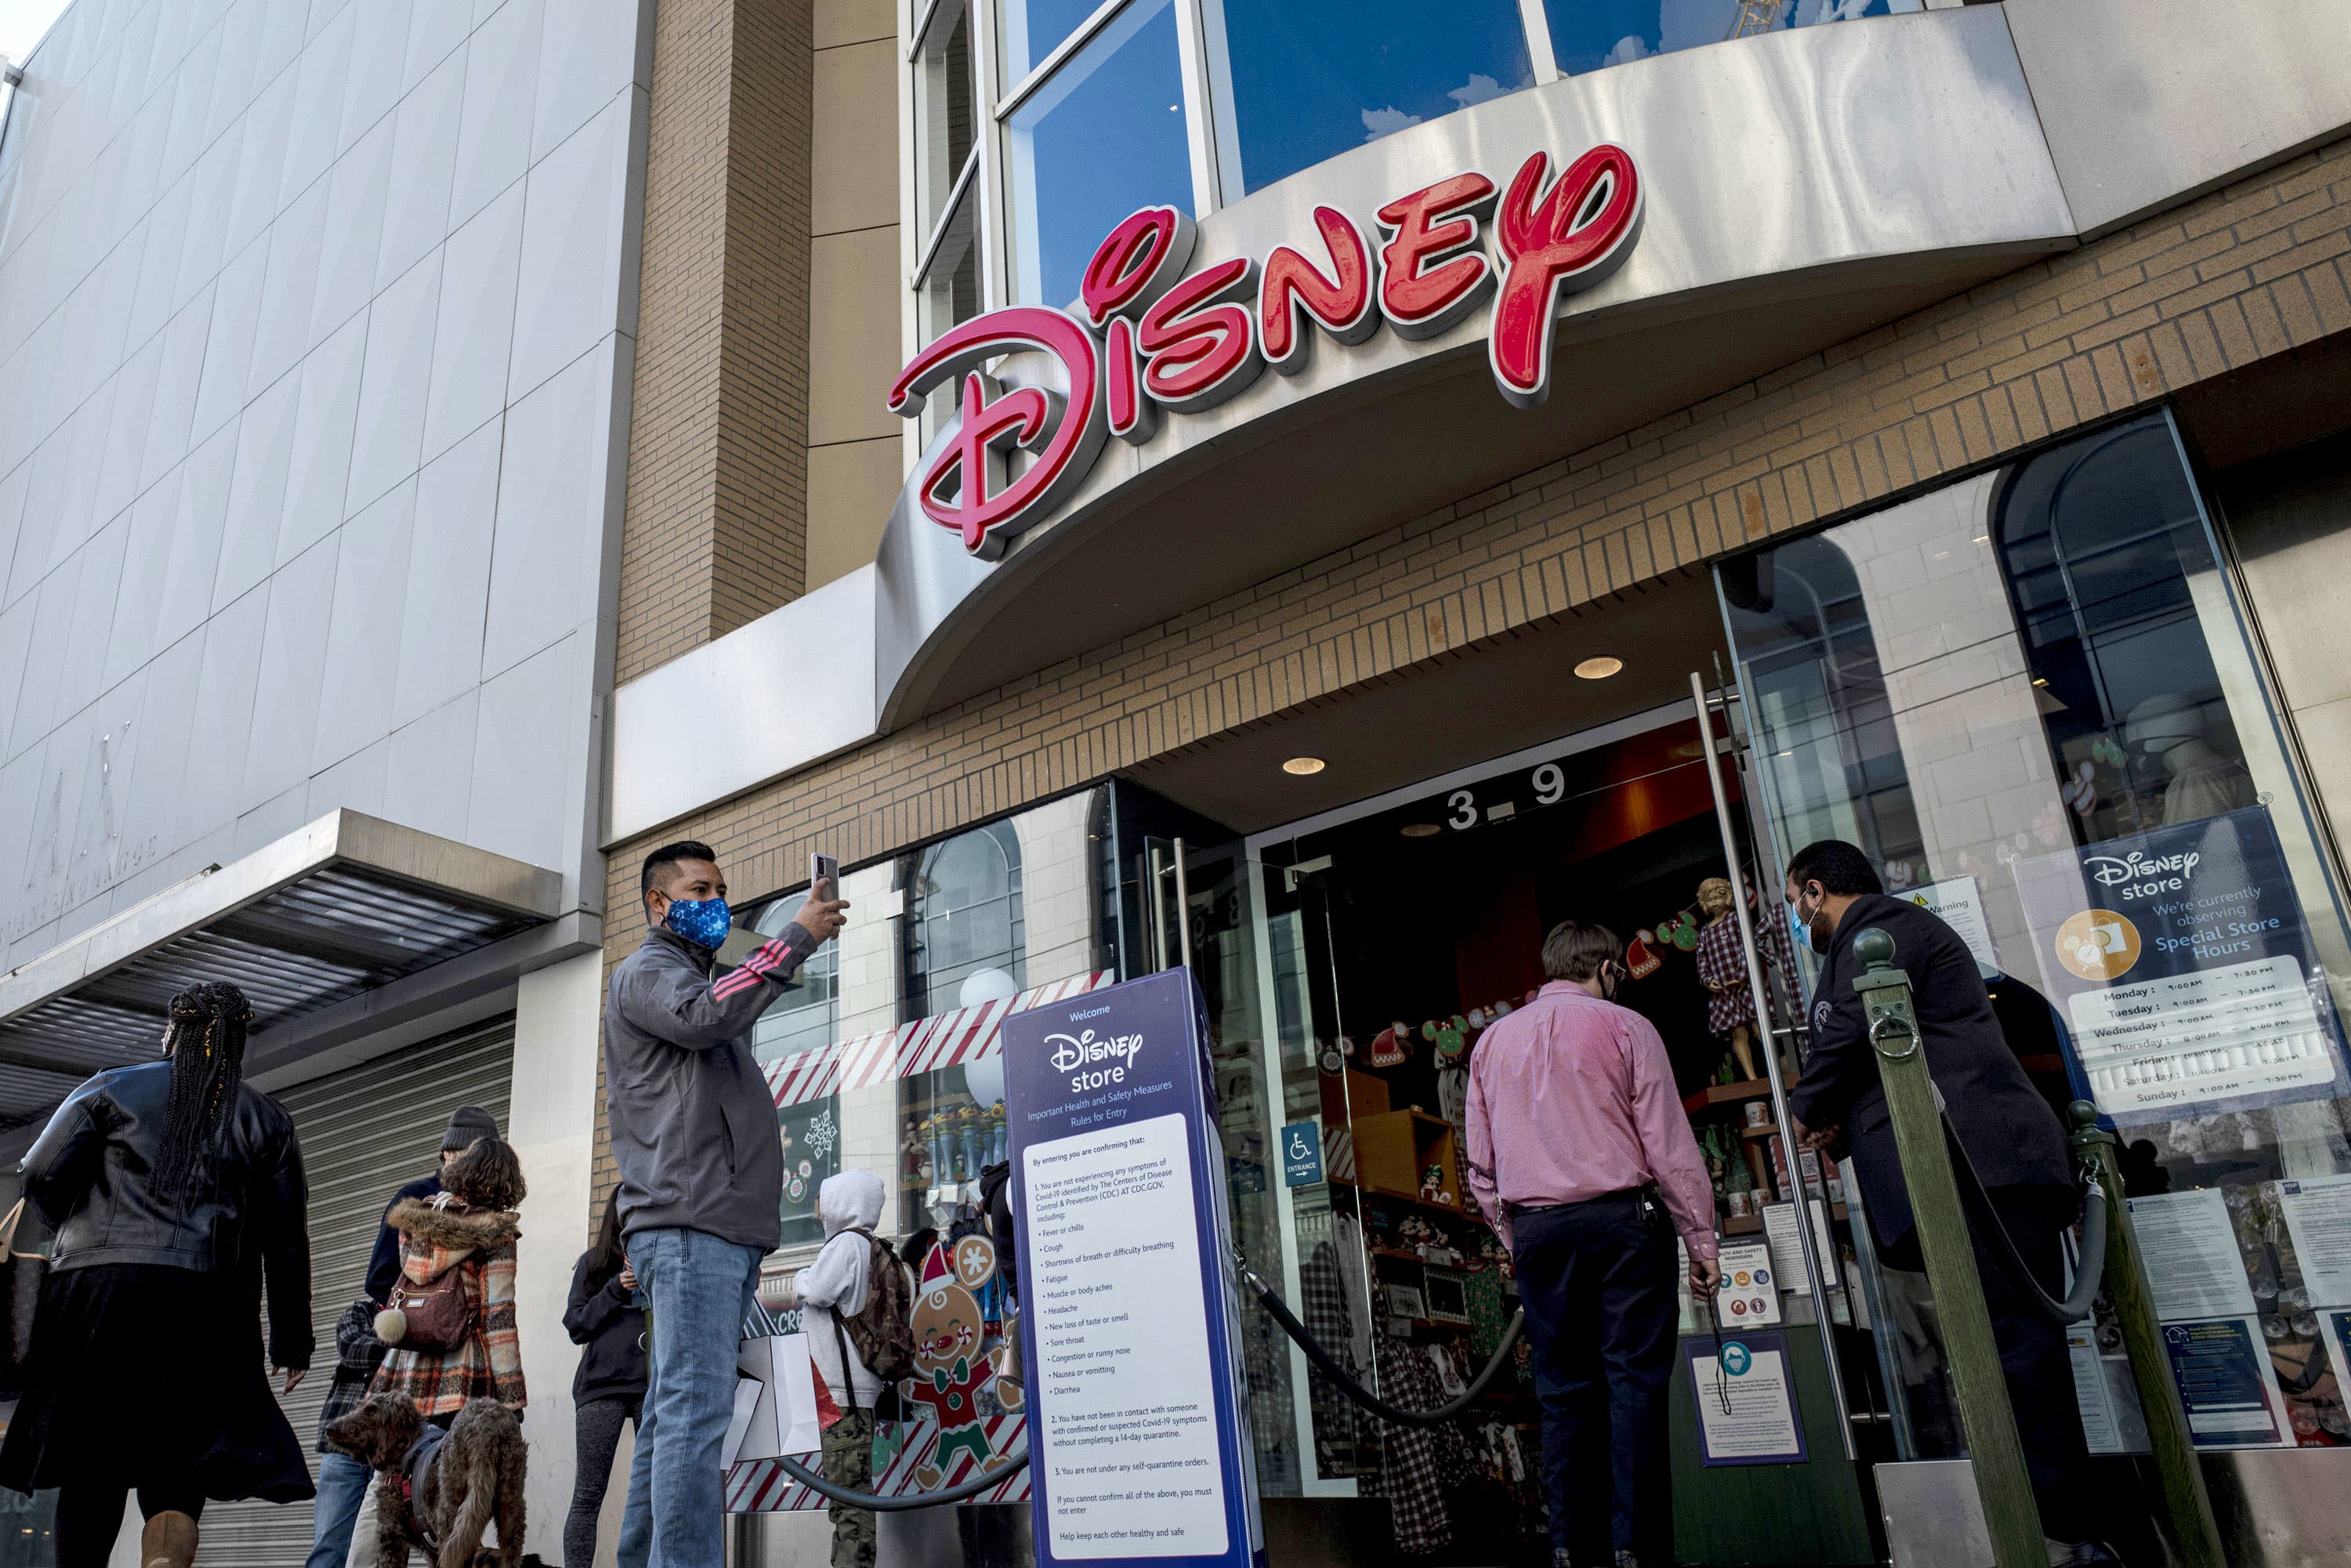 Disney will close 20% of Disney stores by shifting focus to e-commerce